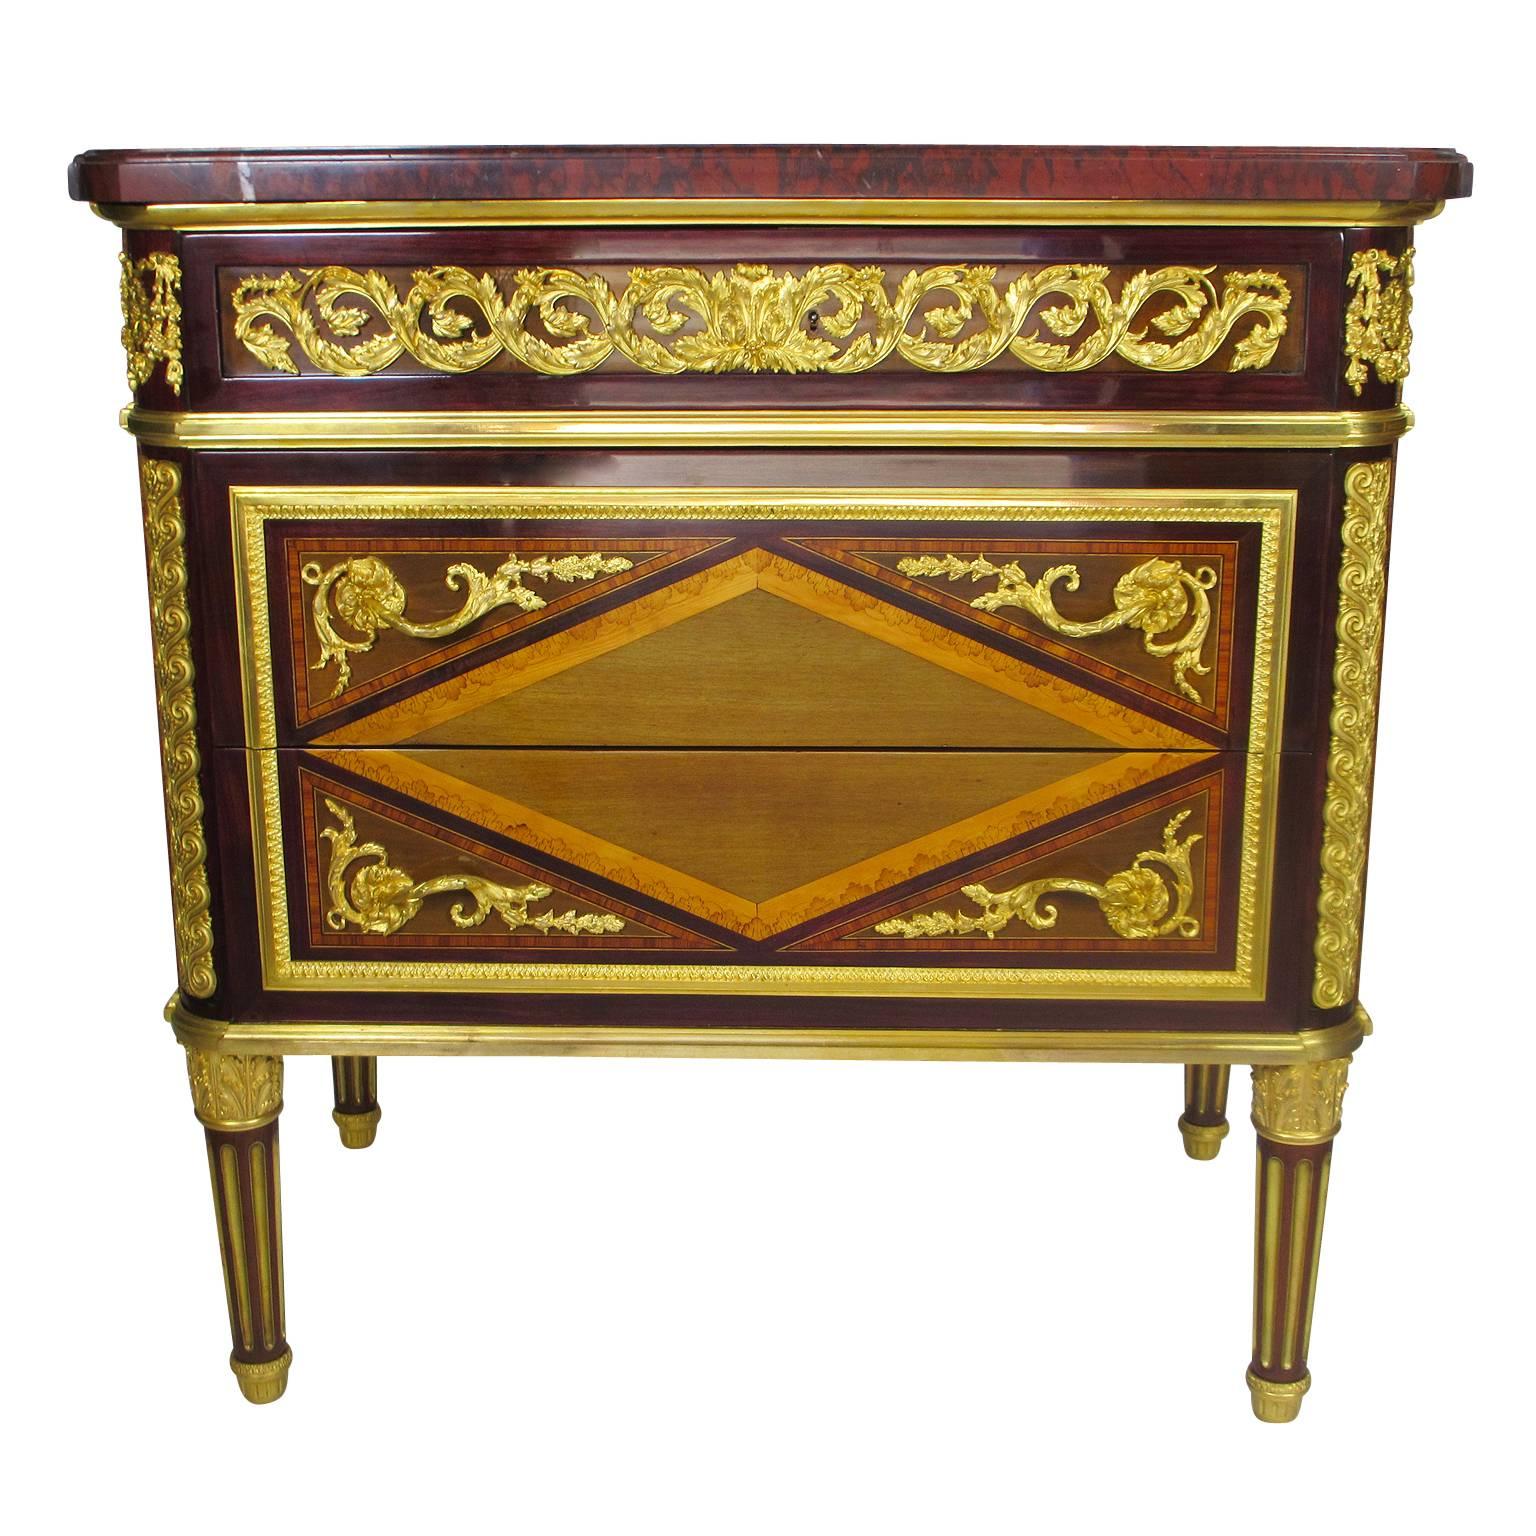 A very fine pair of French 19th century Louis XVI style Ormolu-Mounted Mahogany, Amaranth and Sycamore Marquetry Demi commodes after a model by Jean-François Leleu by Maison Picard, Paris. The rectangular Griotte Uni marble top above a scrolling